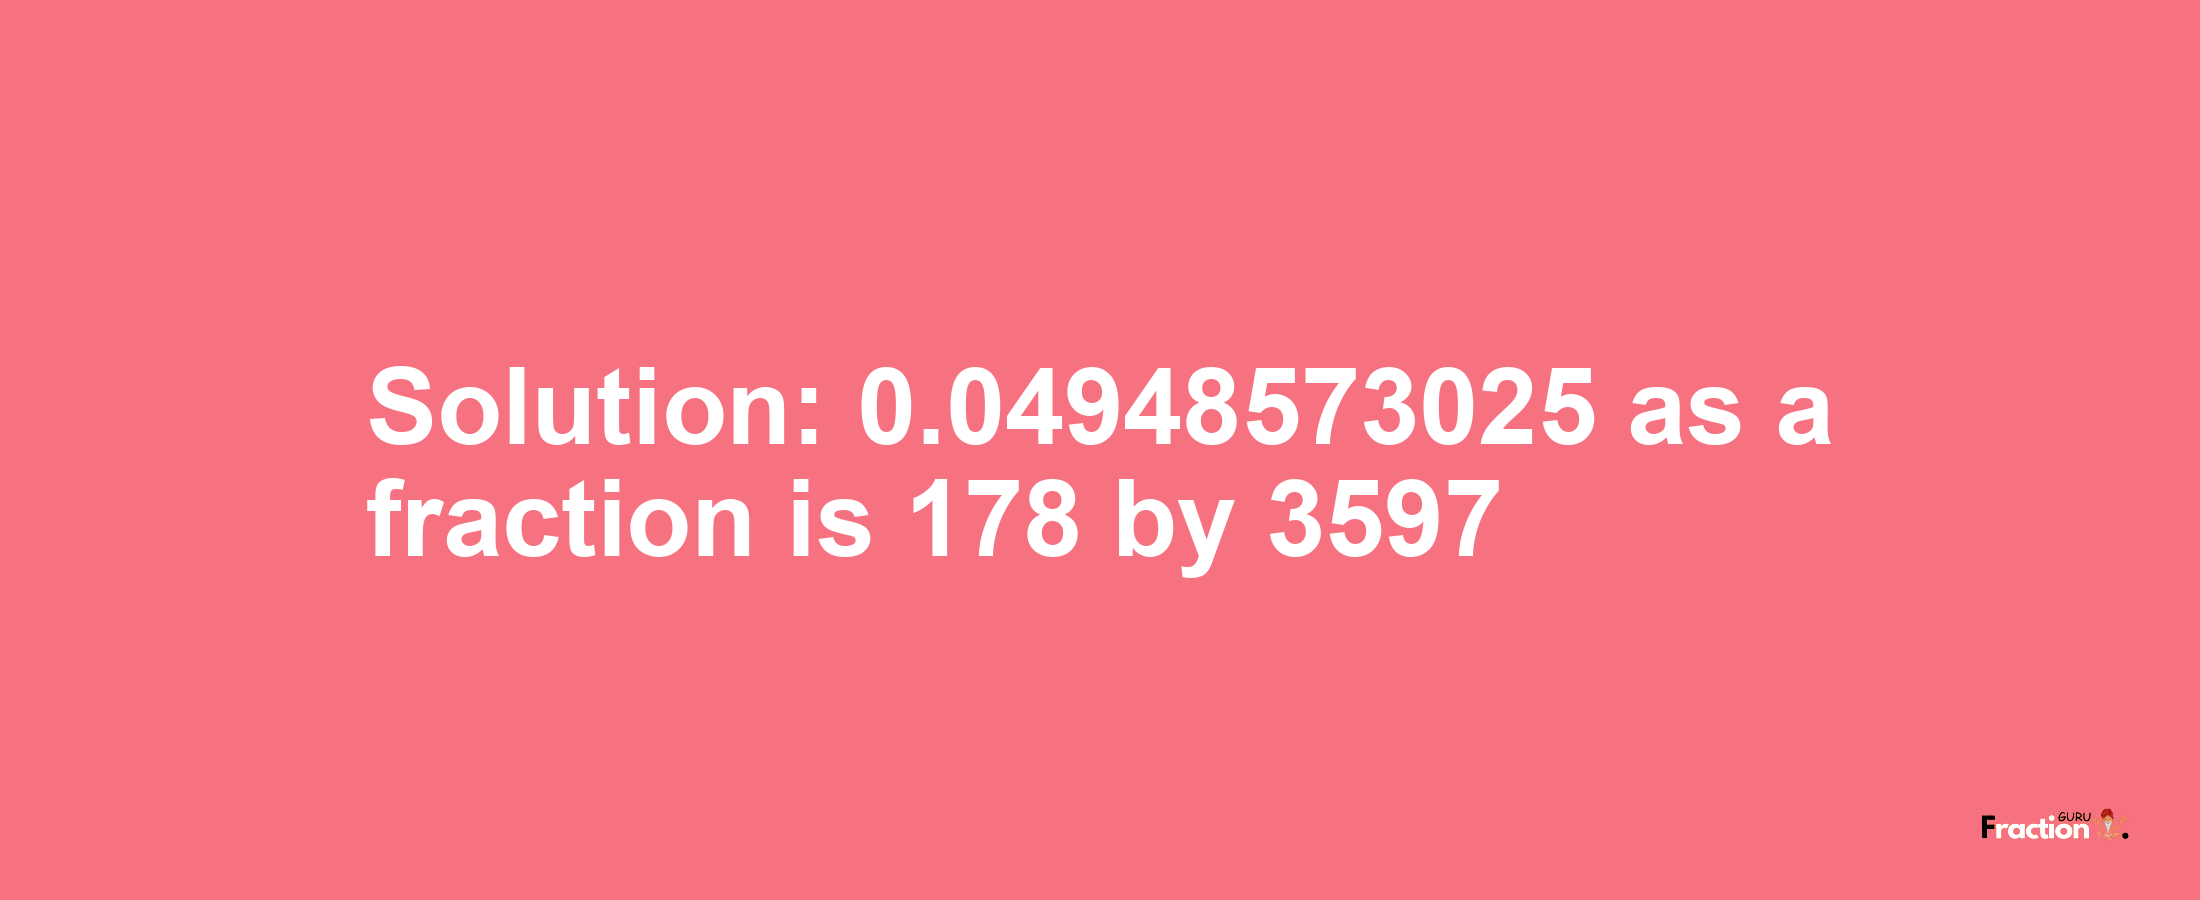 Solution:0.04948573025 as a fraction is 178/3597